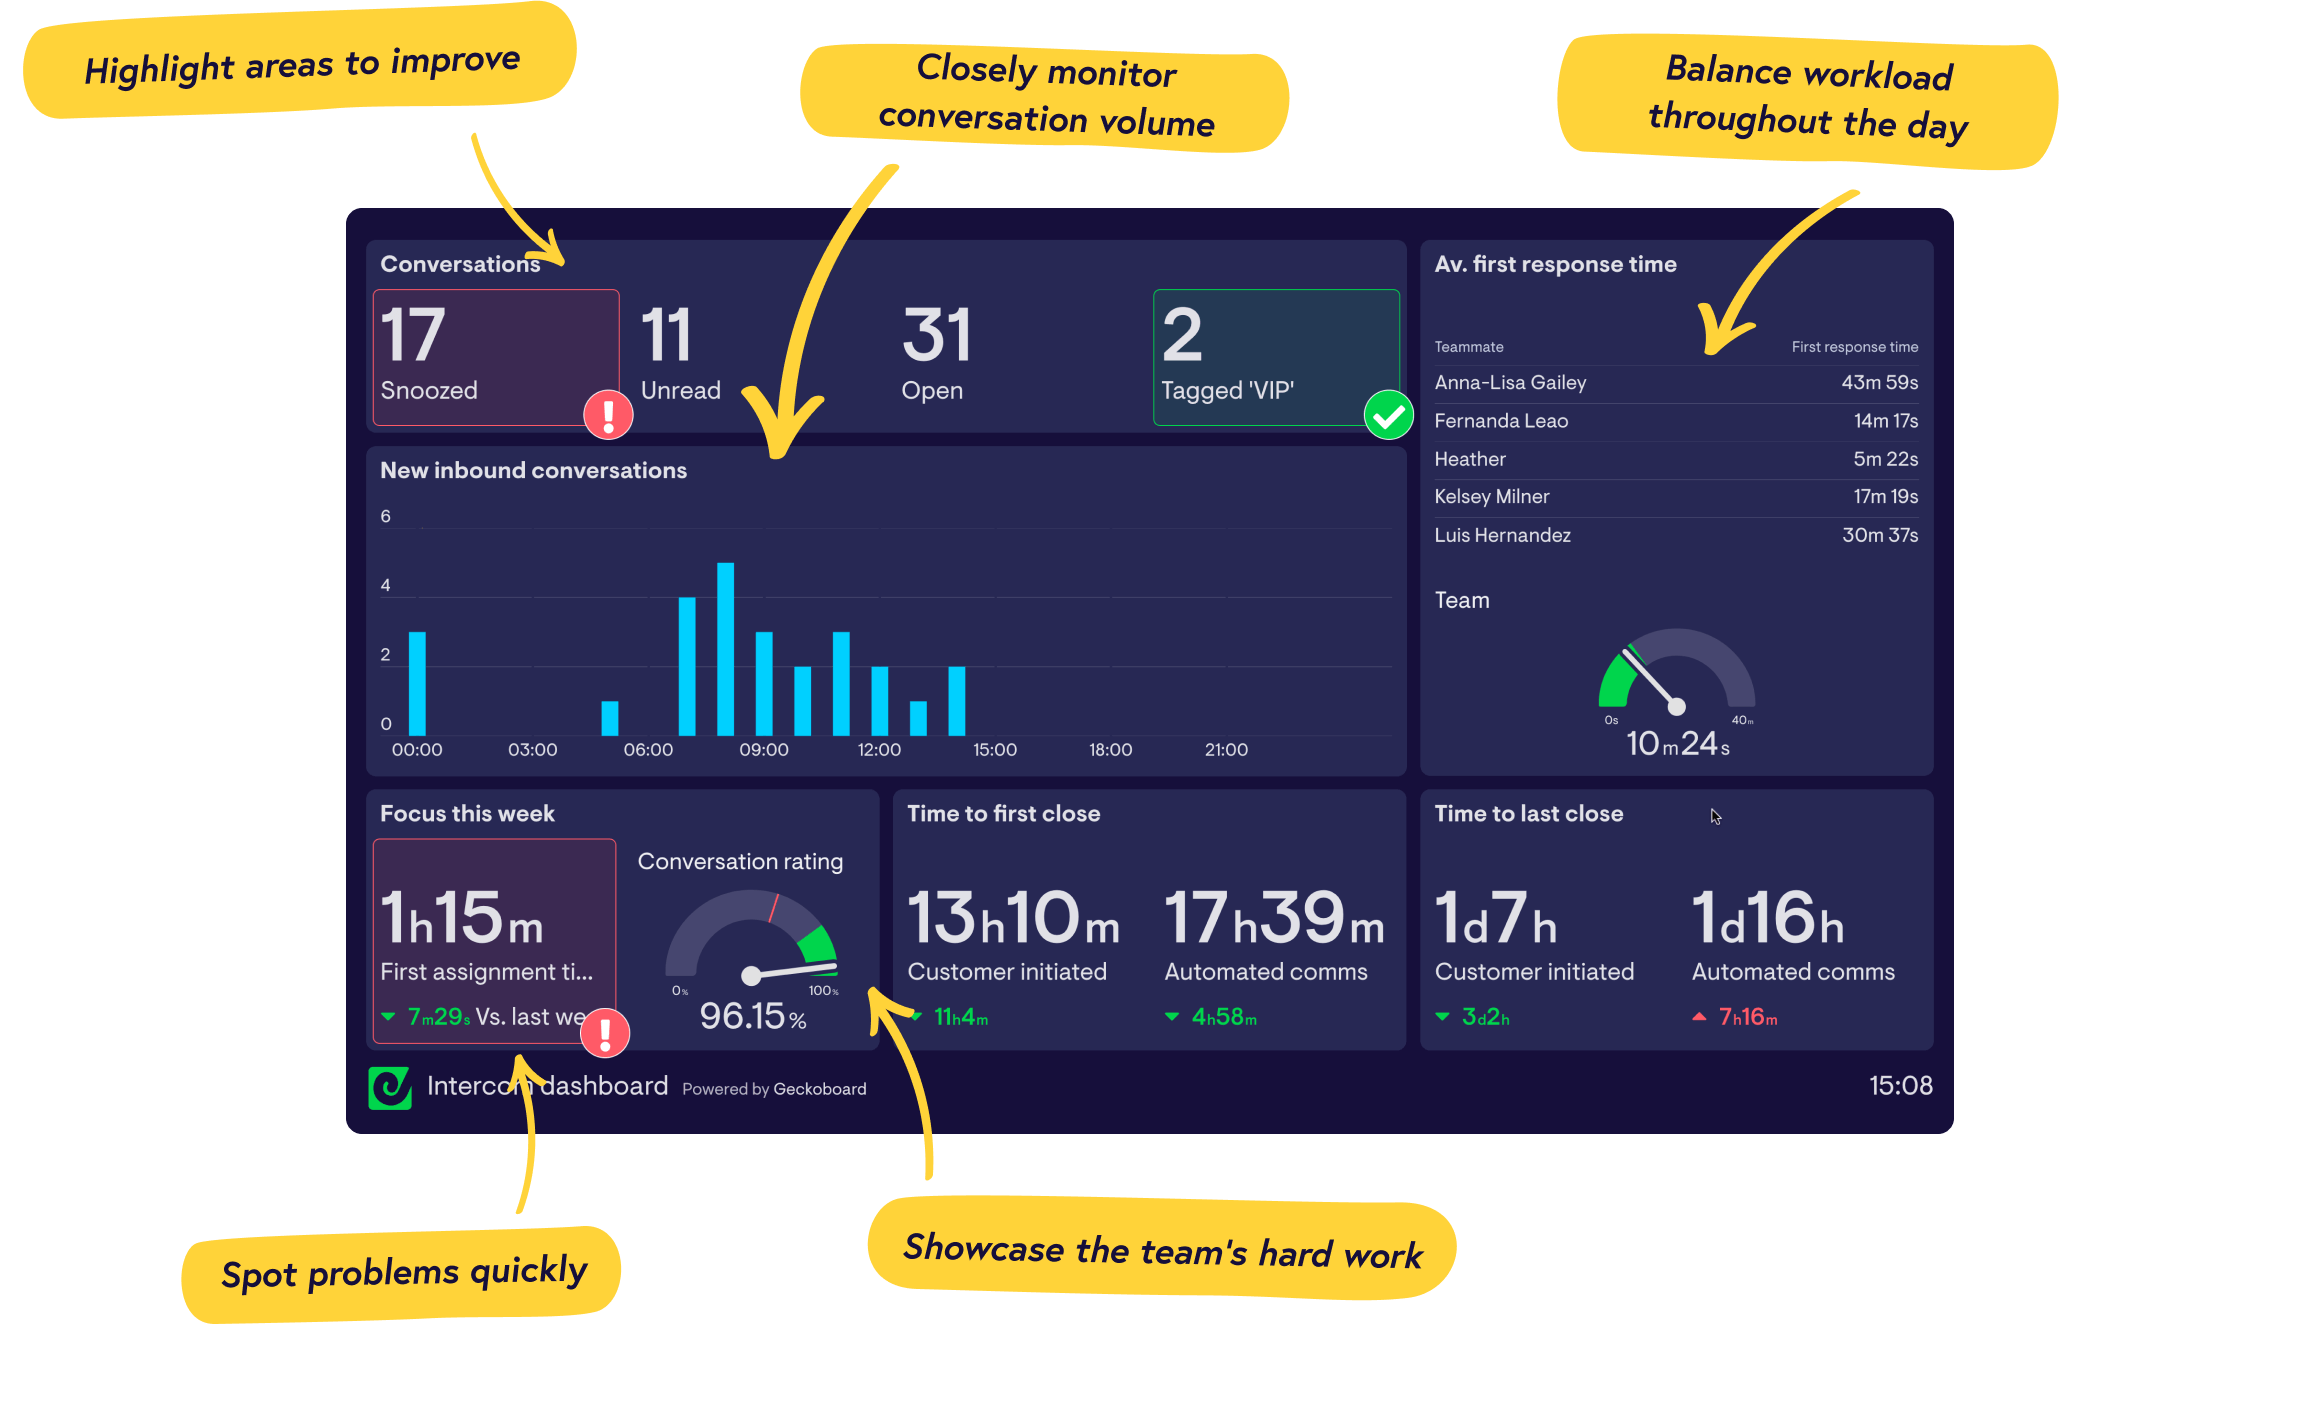 Real-time Intercom dashboards from Geckoboard